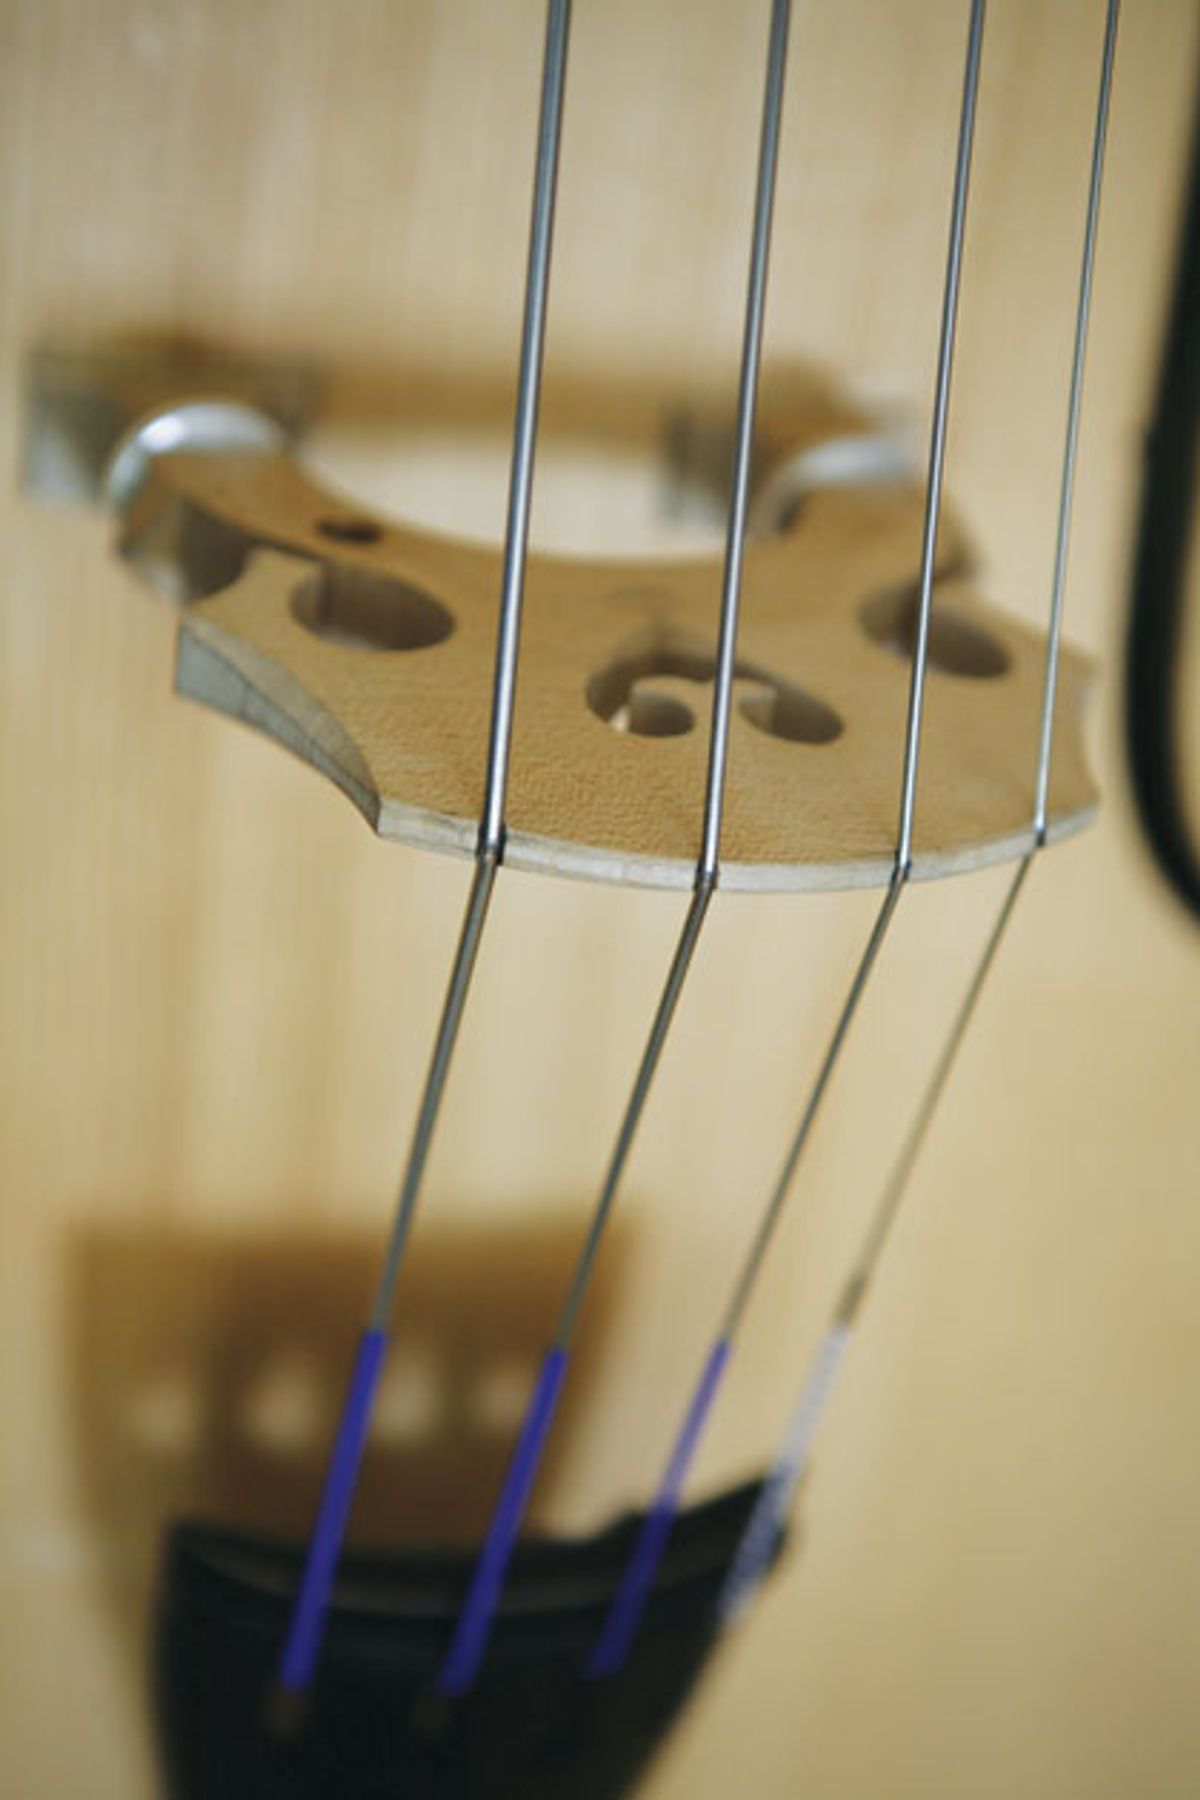 Bass Bench: Cold Facts About Strings